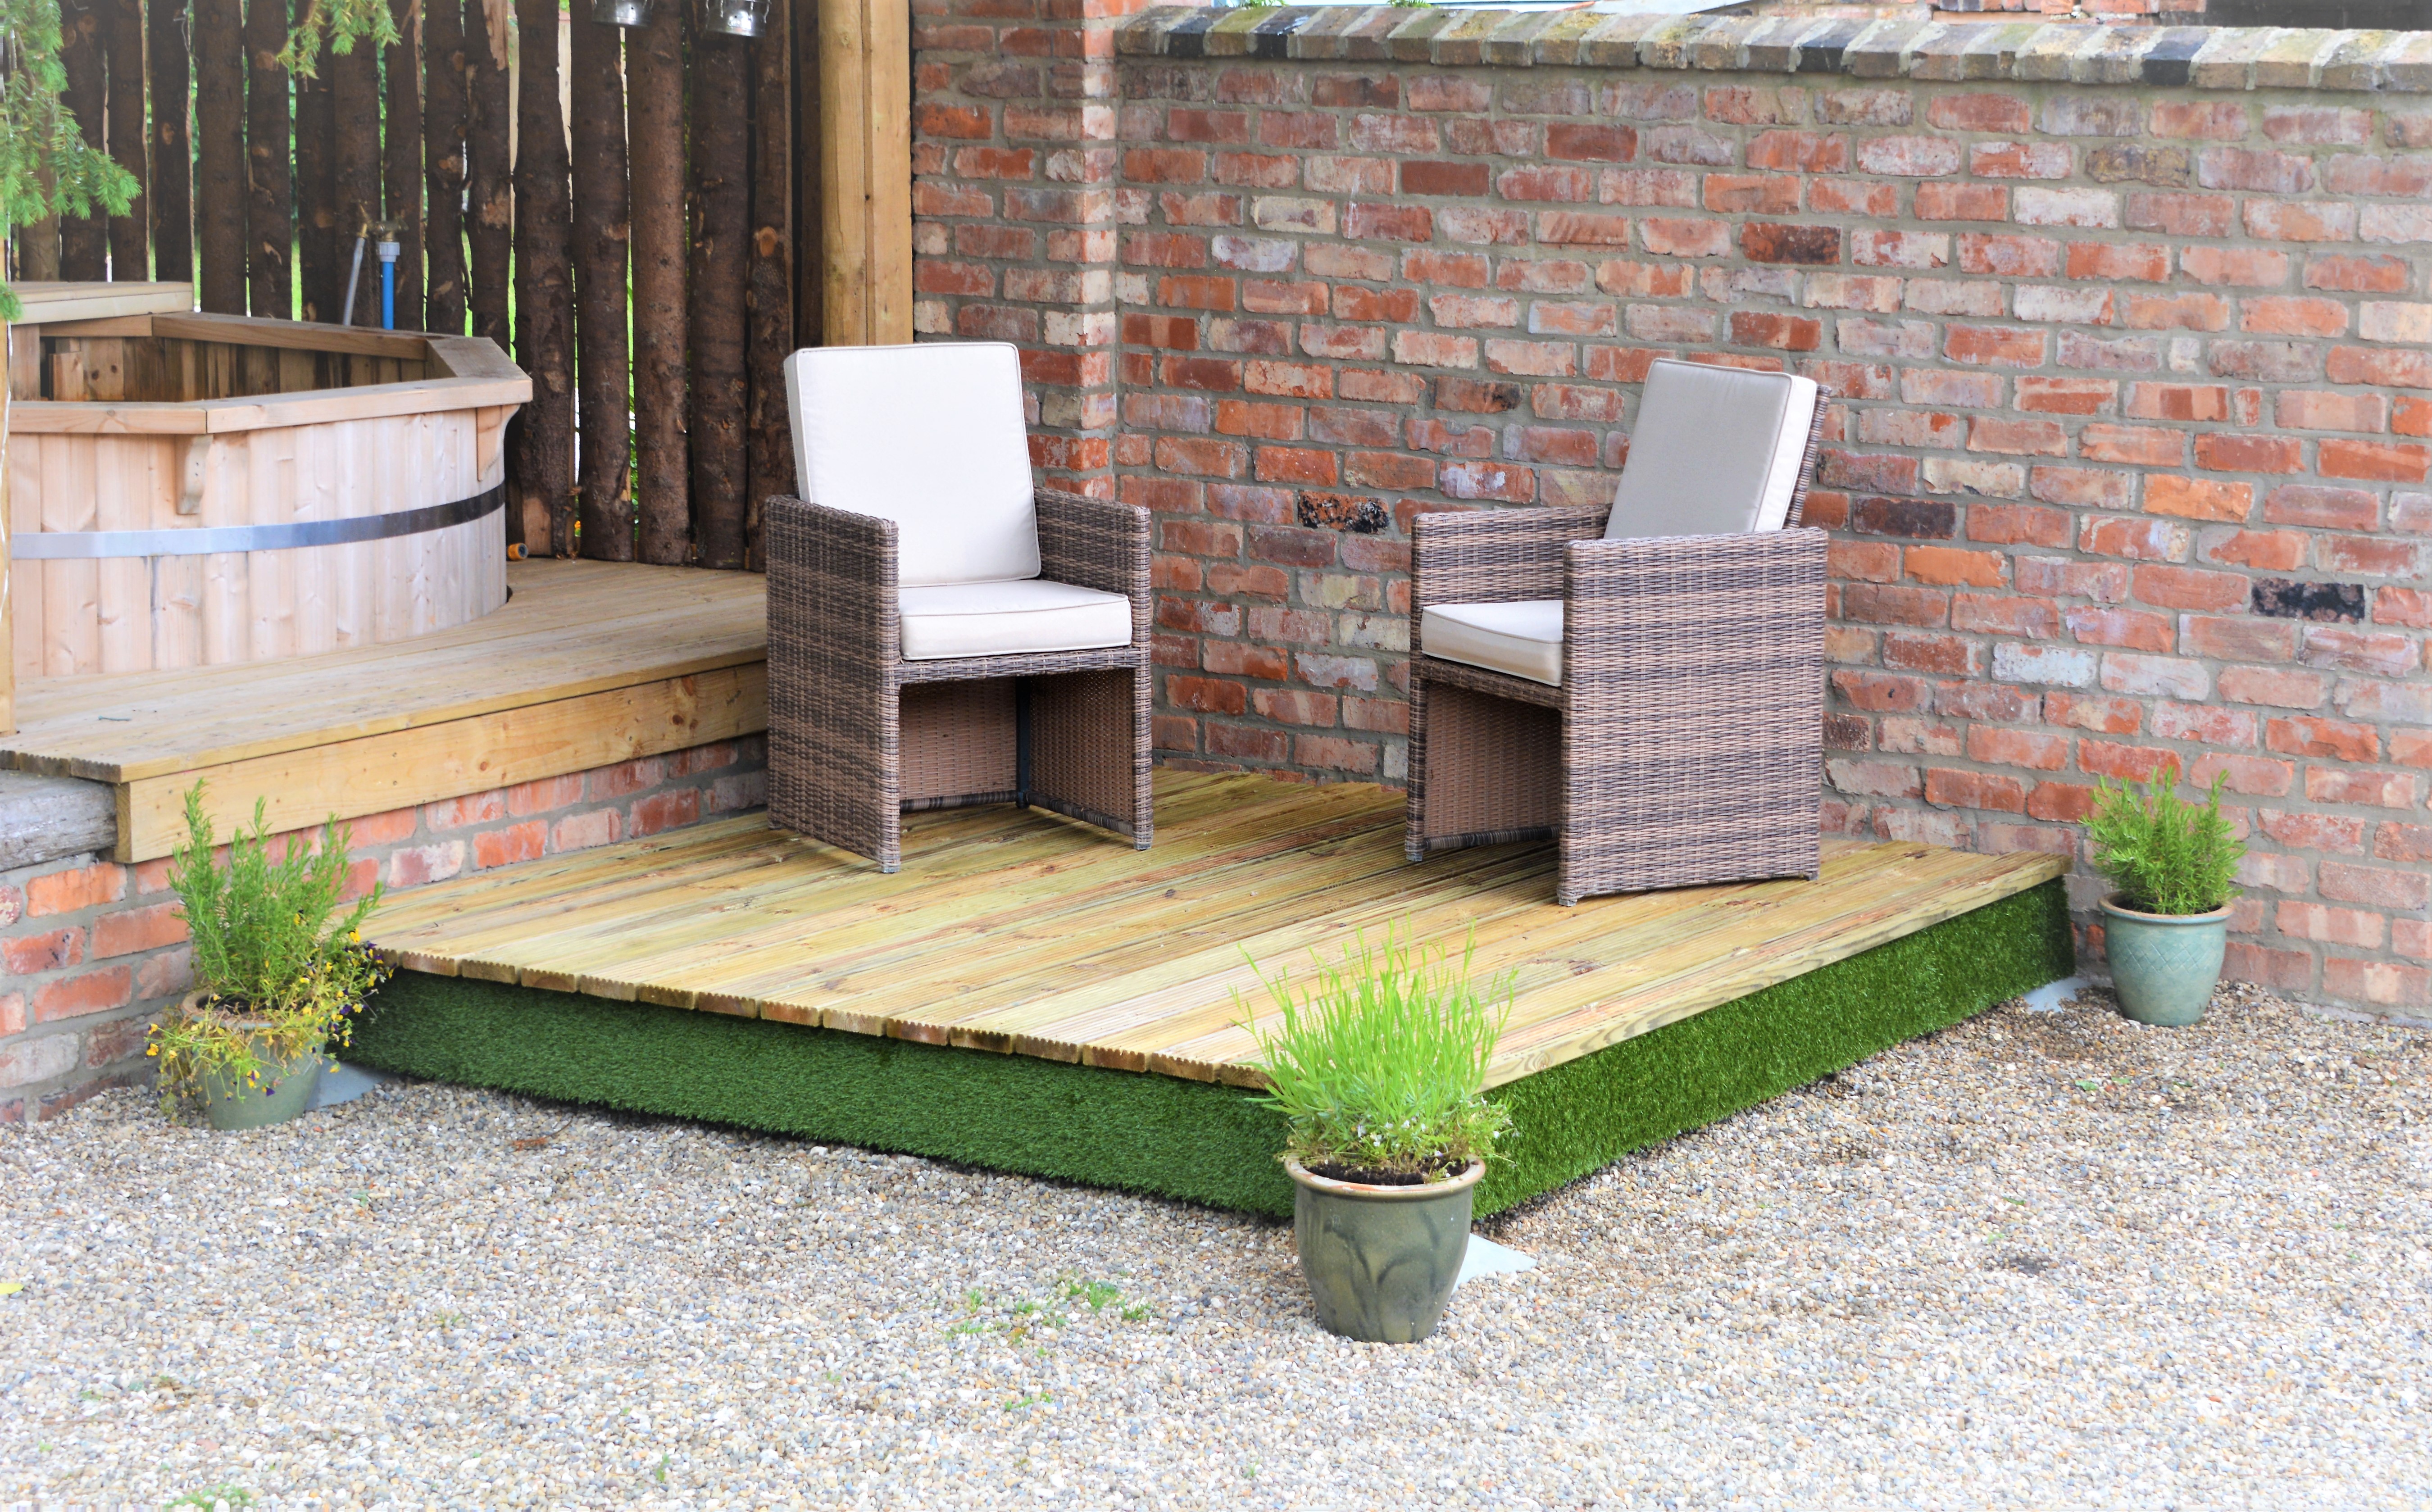 Image of Swift Deck Self-Assembly Garden Decking Kit With Adjustable Foundations - 2.4 x 2.4m